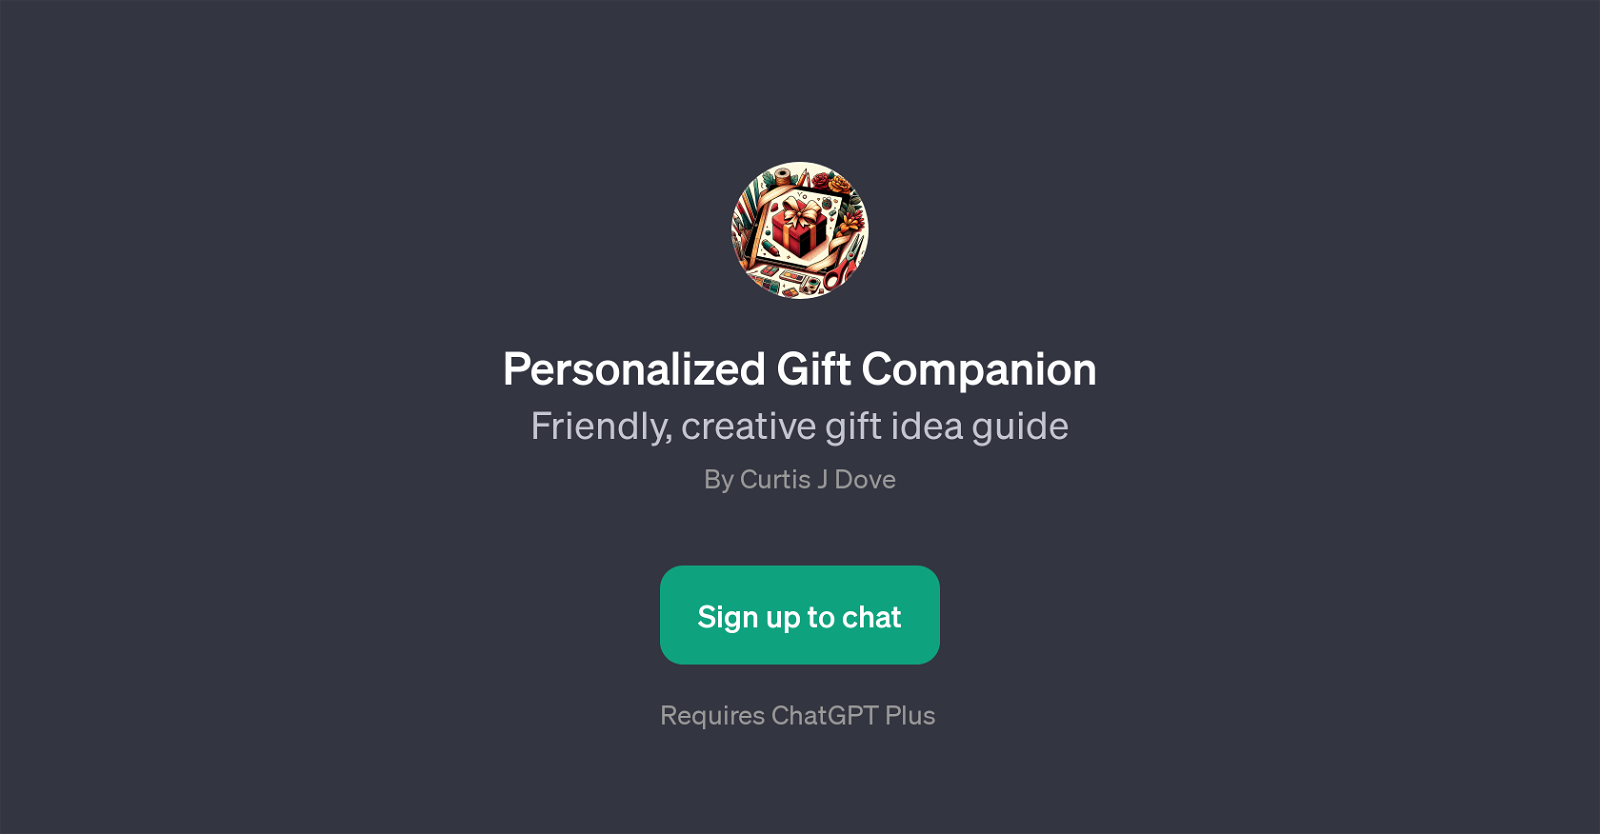 Personalized Gift Companion website